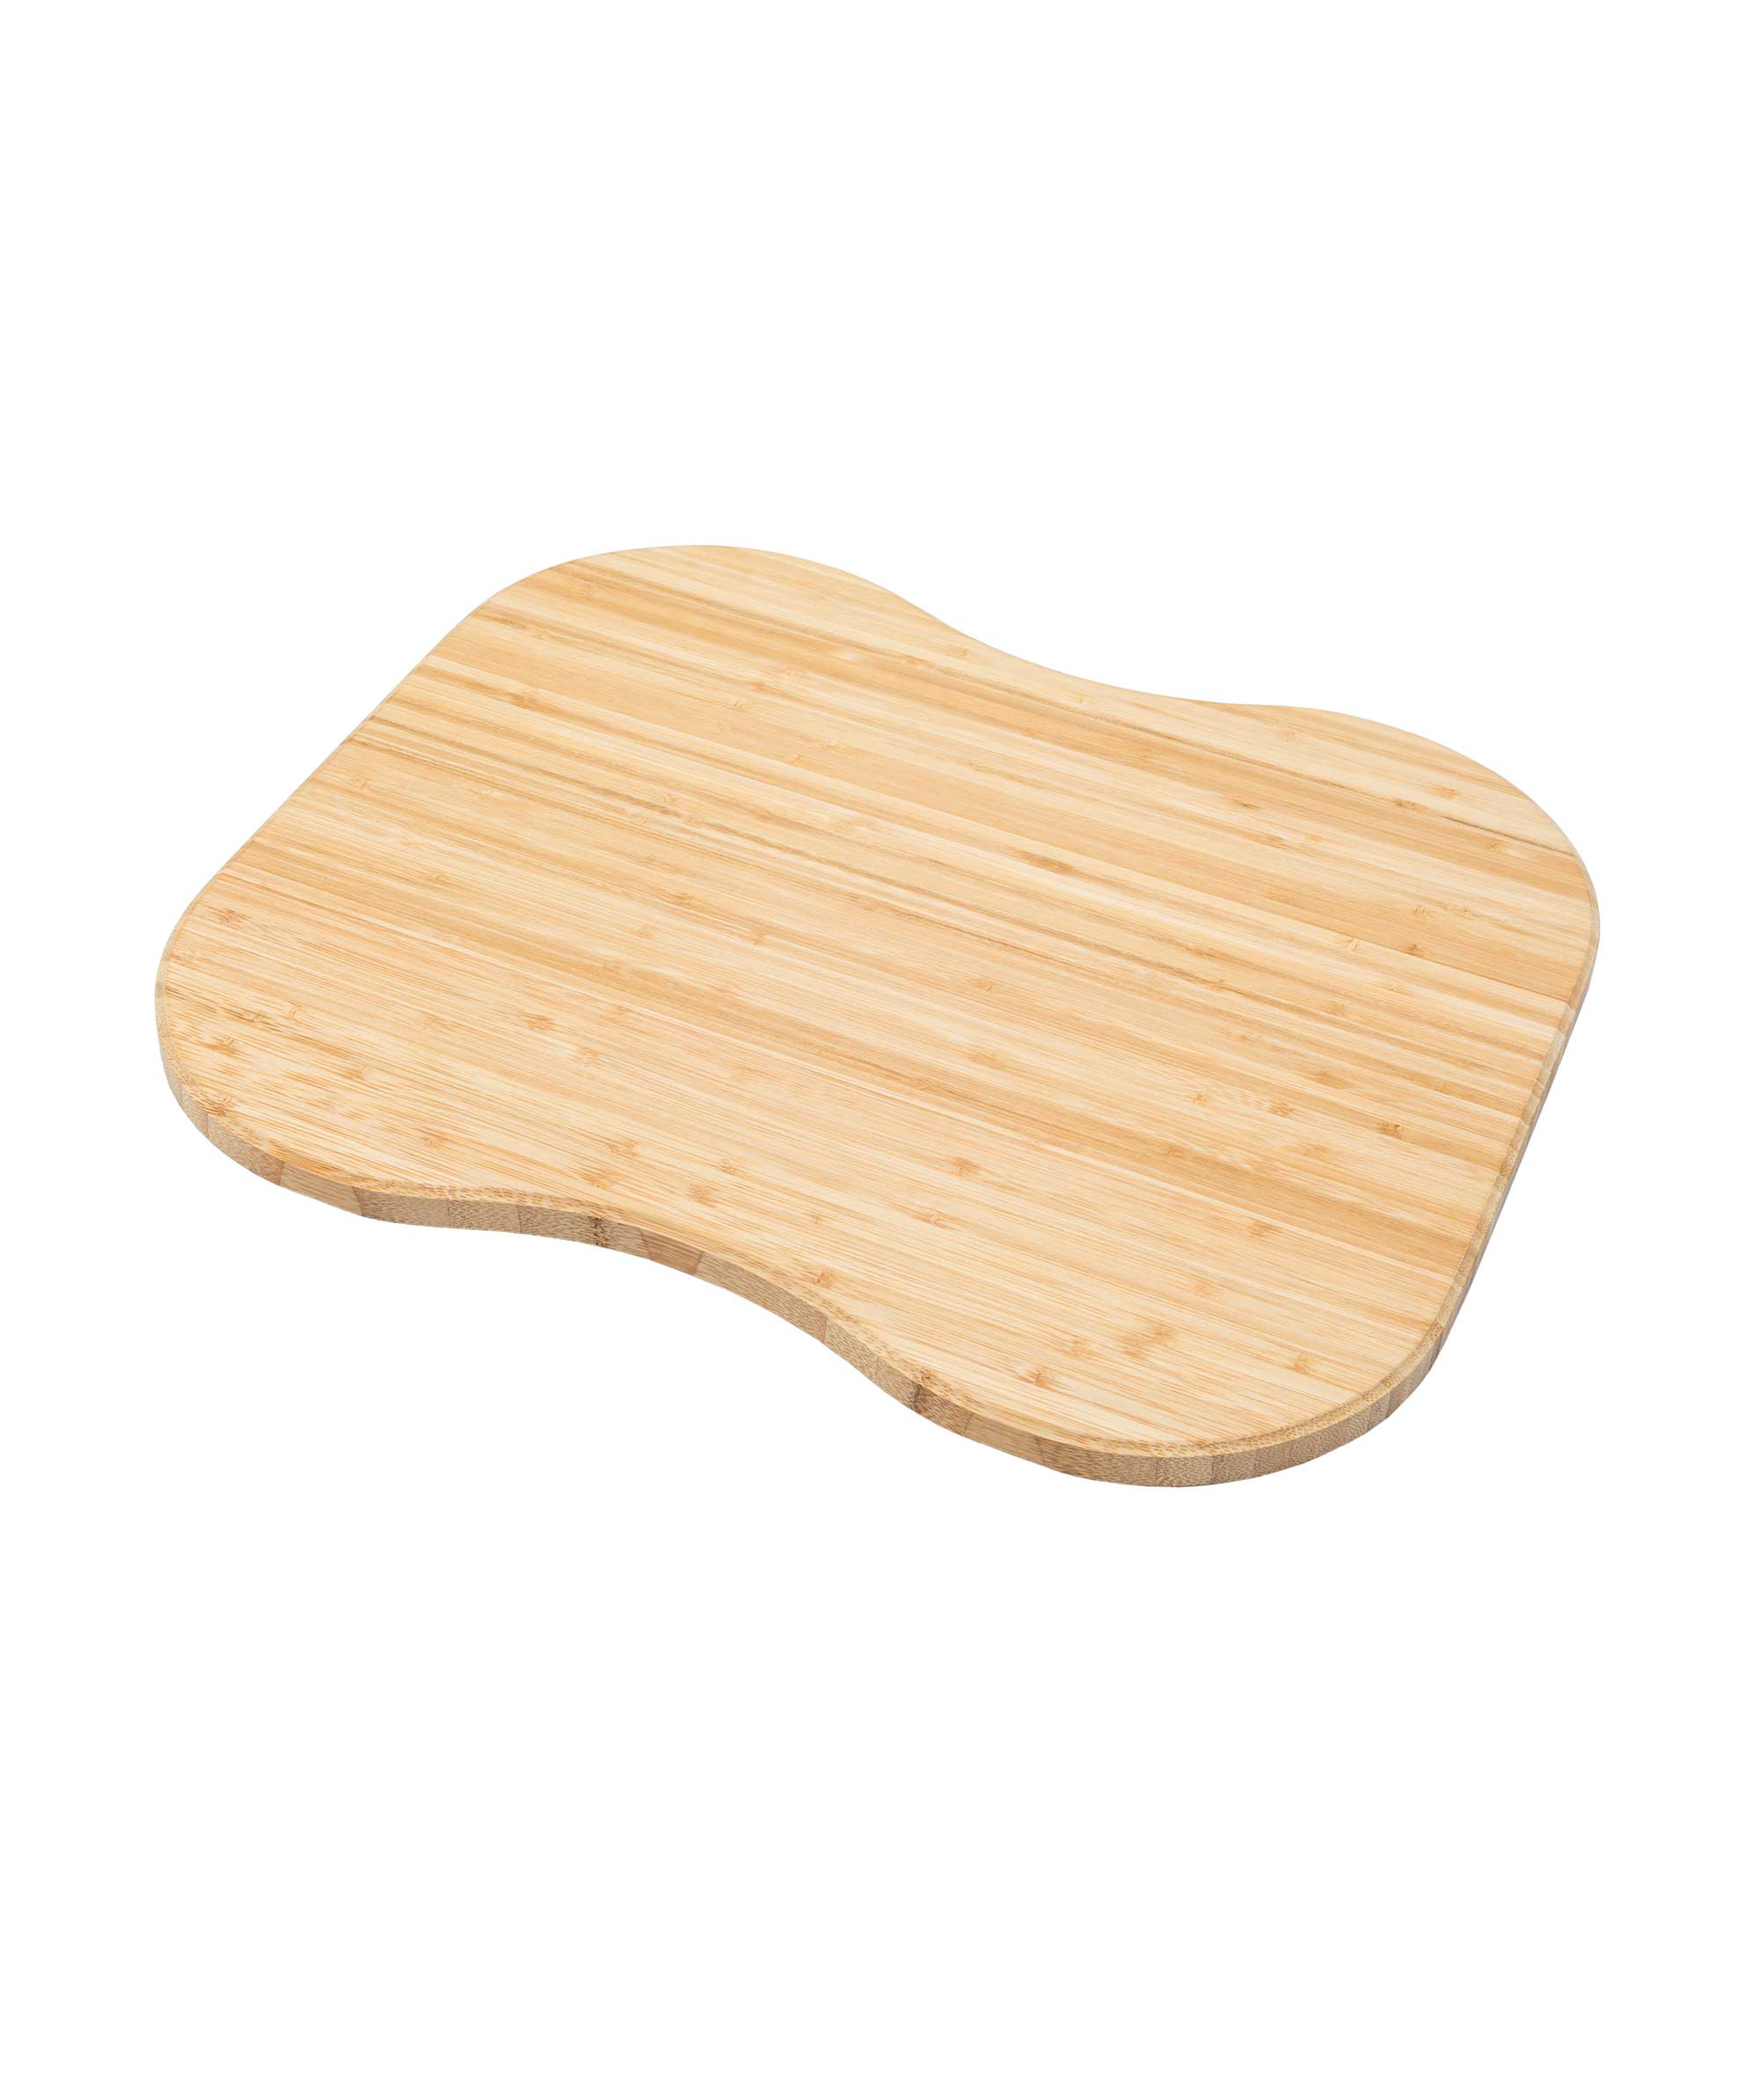 Cutting Board 03 - for Acero 002 and 005